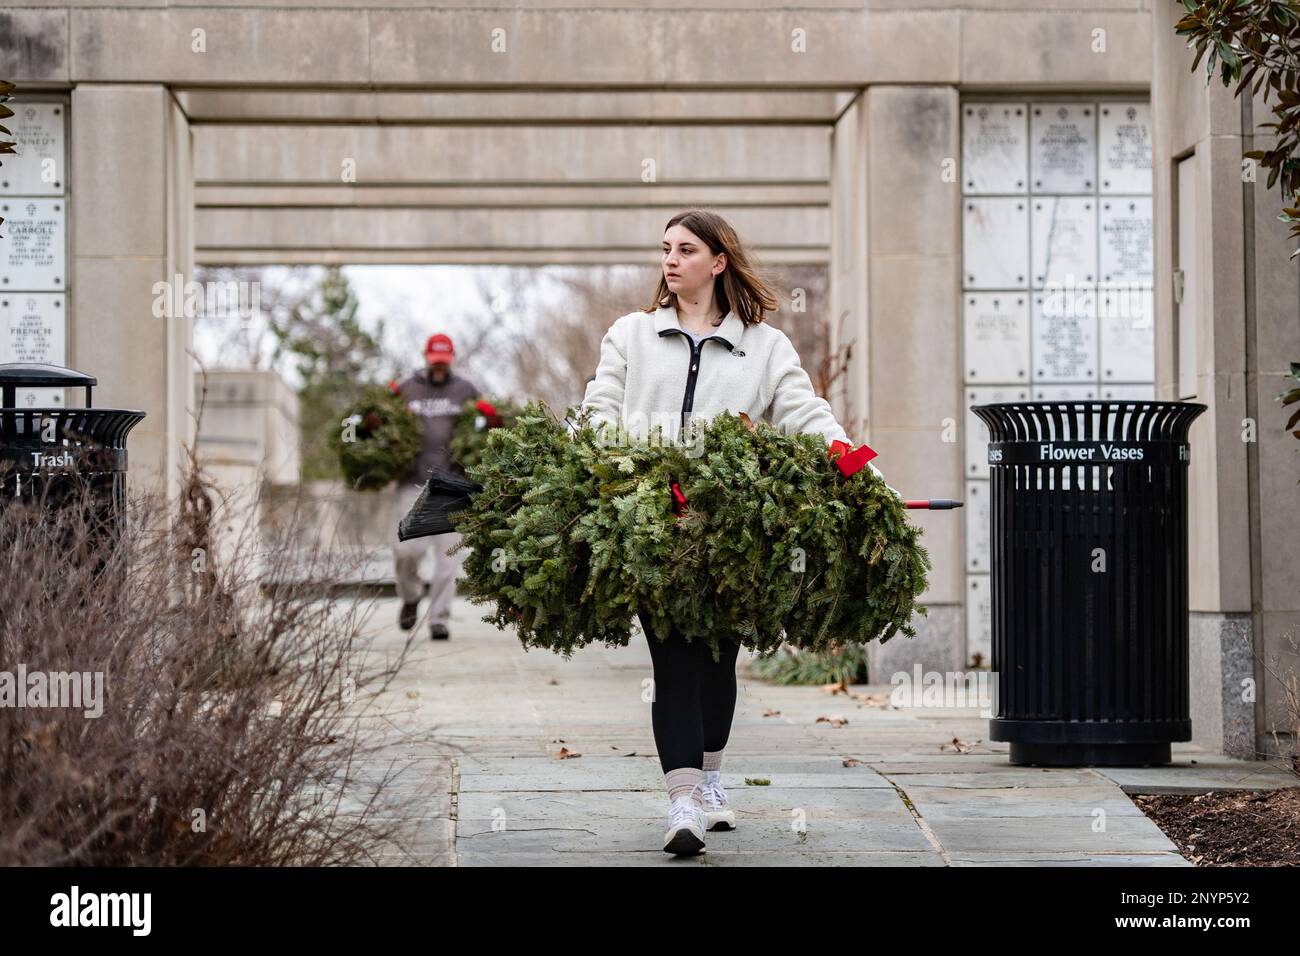 Volunteers participate in the Wreaths Across America’s clean-up day, commonly known as Wreaths Out, in Columbarium Court 3 of Arlington National Cemetery, Arlington, Va., Jan. 21, 2023. This year, over 3,000 volunteers participated and removed the 257,000 wreaths originally placed at ANC on Dec. 17, 2022. Stock Photo